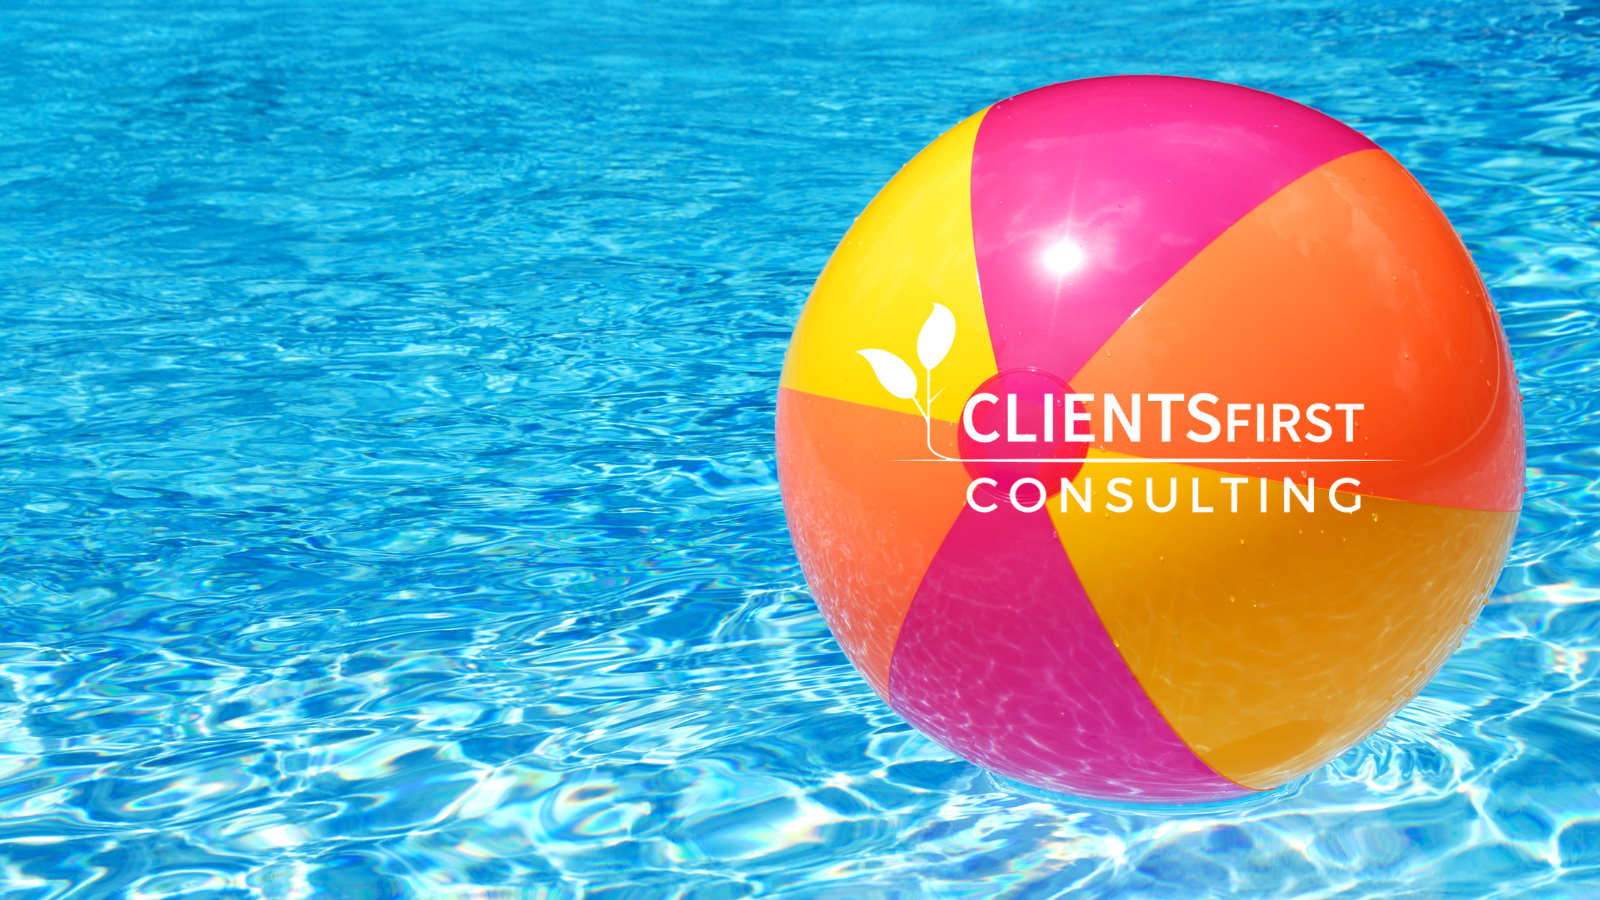 CRM Summer School: A Creative Way To Refresh Your Law Firm’s CRM Data This Summer